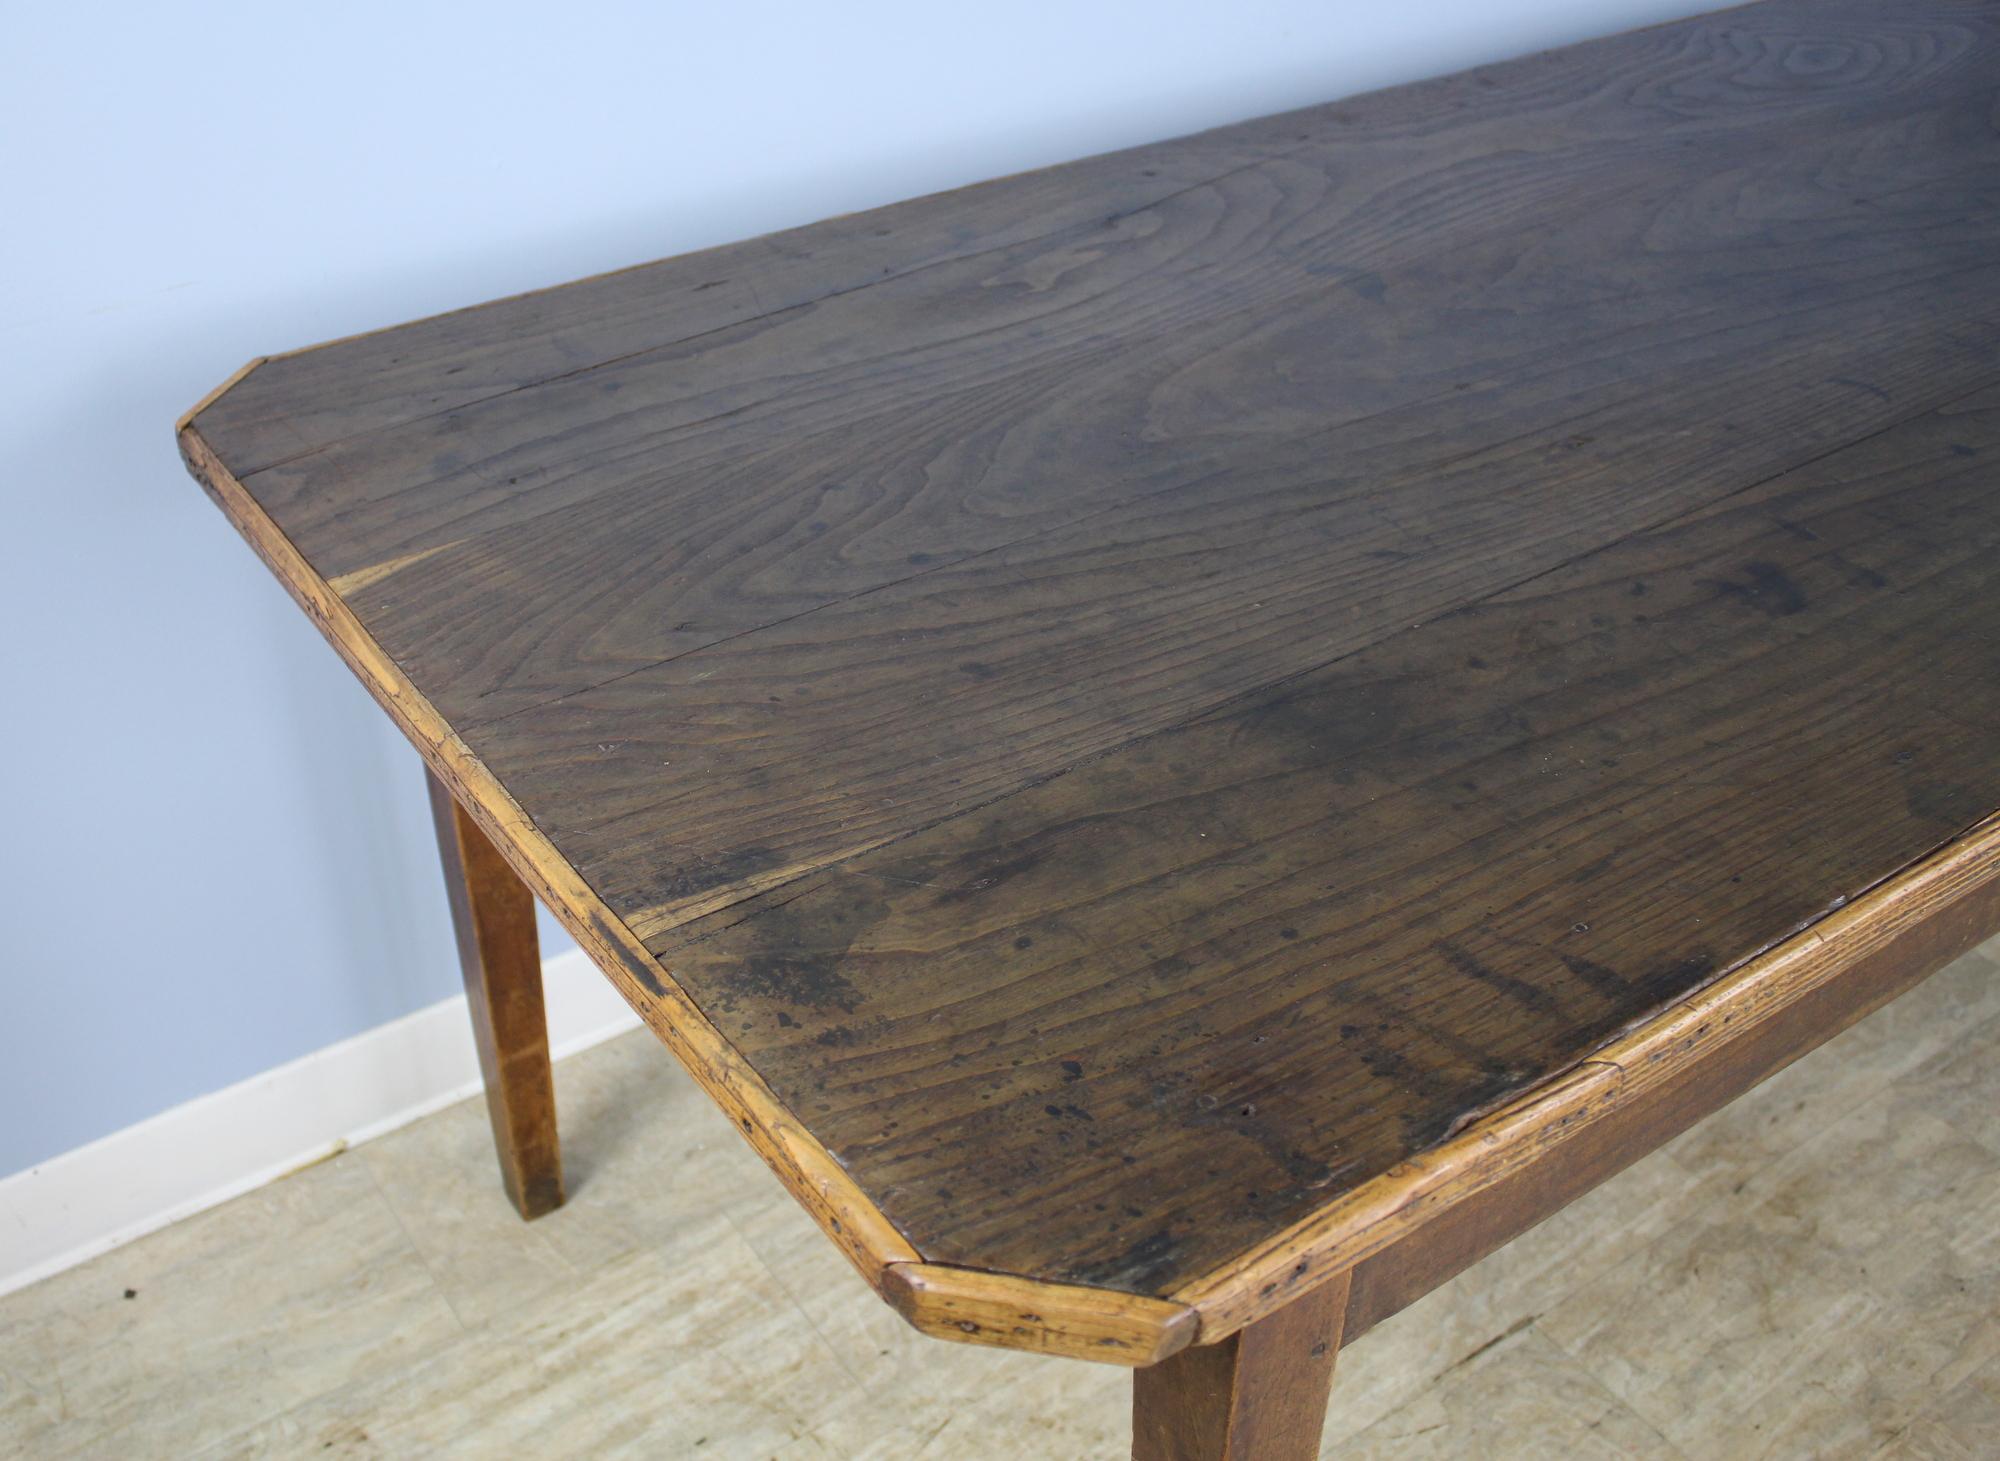 French Chestnut Farm Table with Canted Corners and Decorative Edge